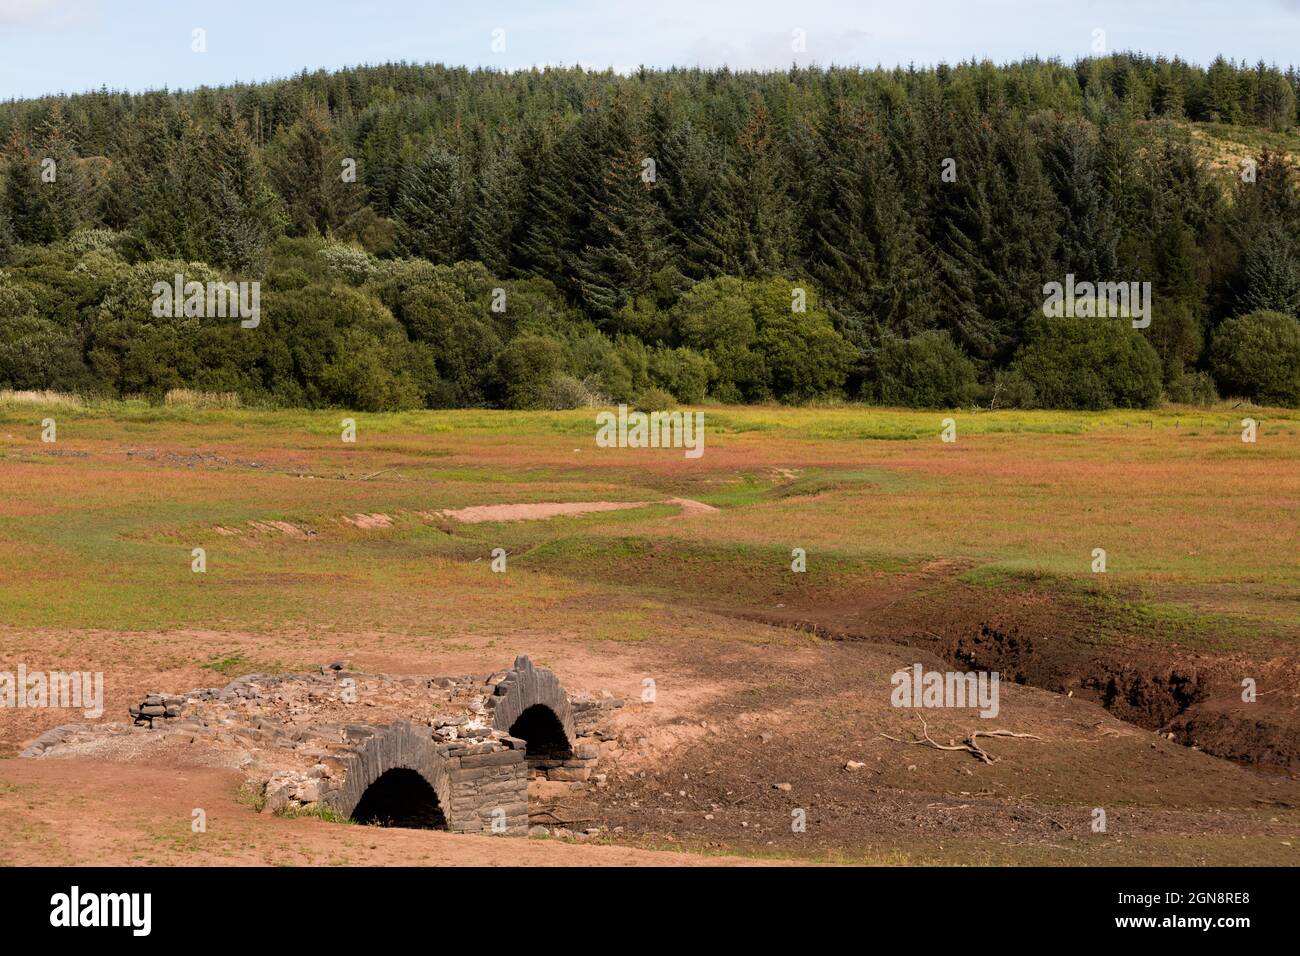 Llwyn Onn reservoir, Merthyr Tydfil, South Wales, UK.  23 September 2021.  UK weather:  Lower water levels than normal at this reservoir has uncovered an old bridge, Pont Yr Daf, normally underwater.  Credit: Andrew Bartlett/Alamy Live News. Stock Photo